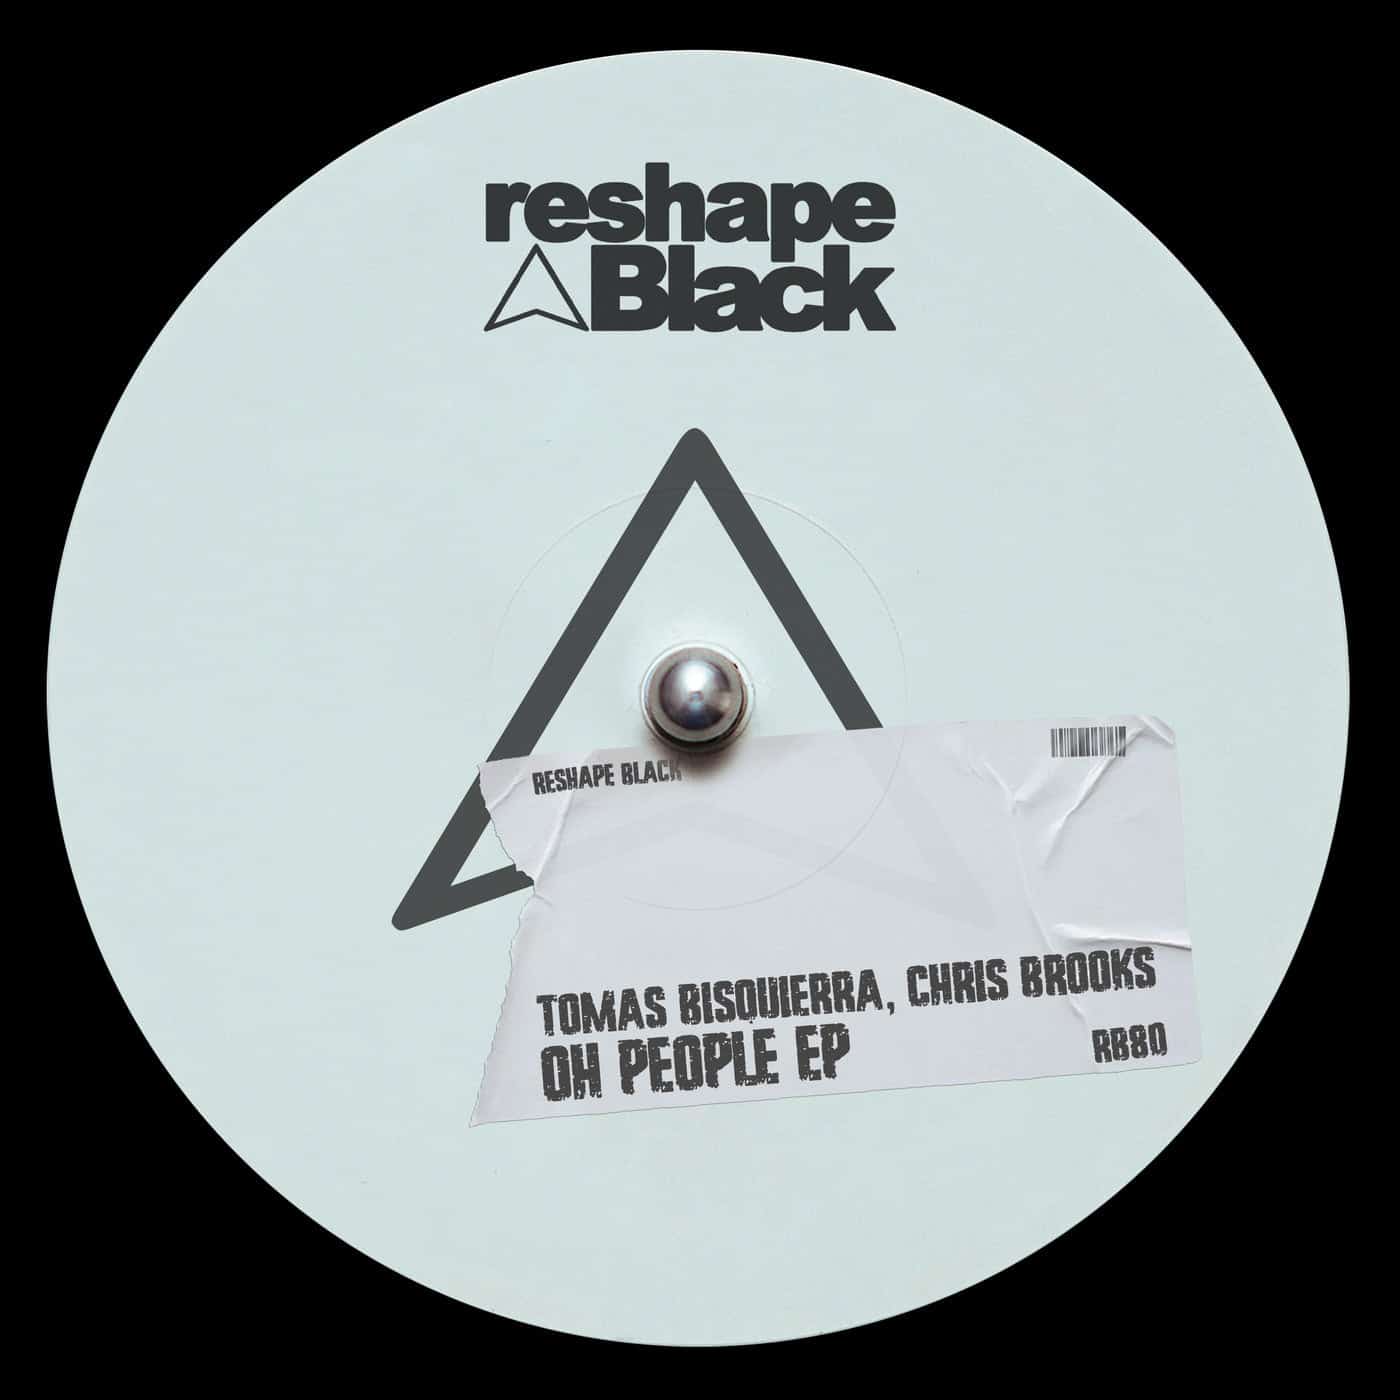 Download Tomas Bisquierra, Chris Brooks - Oh People EP on Electrobuzz